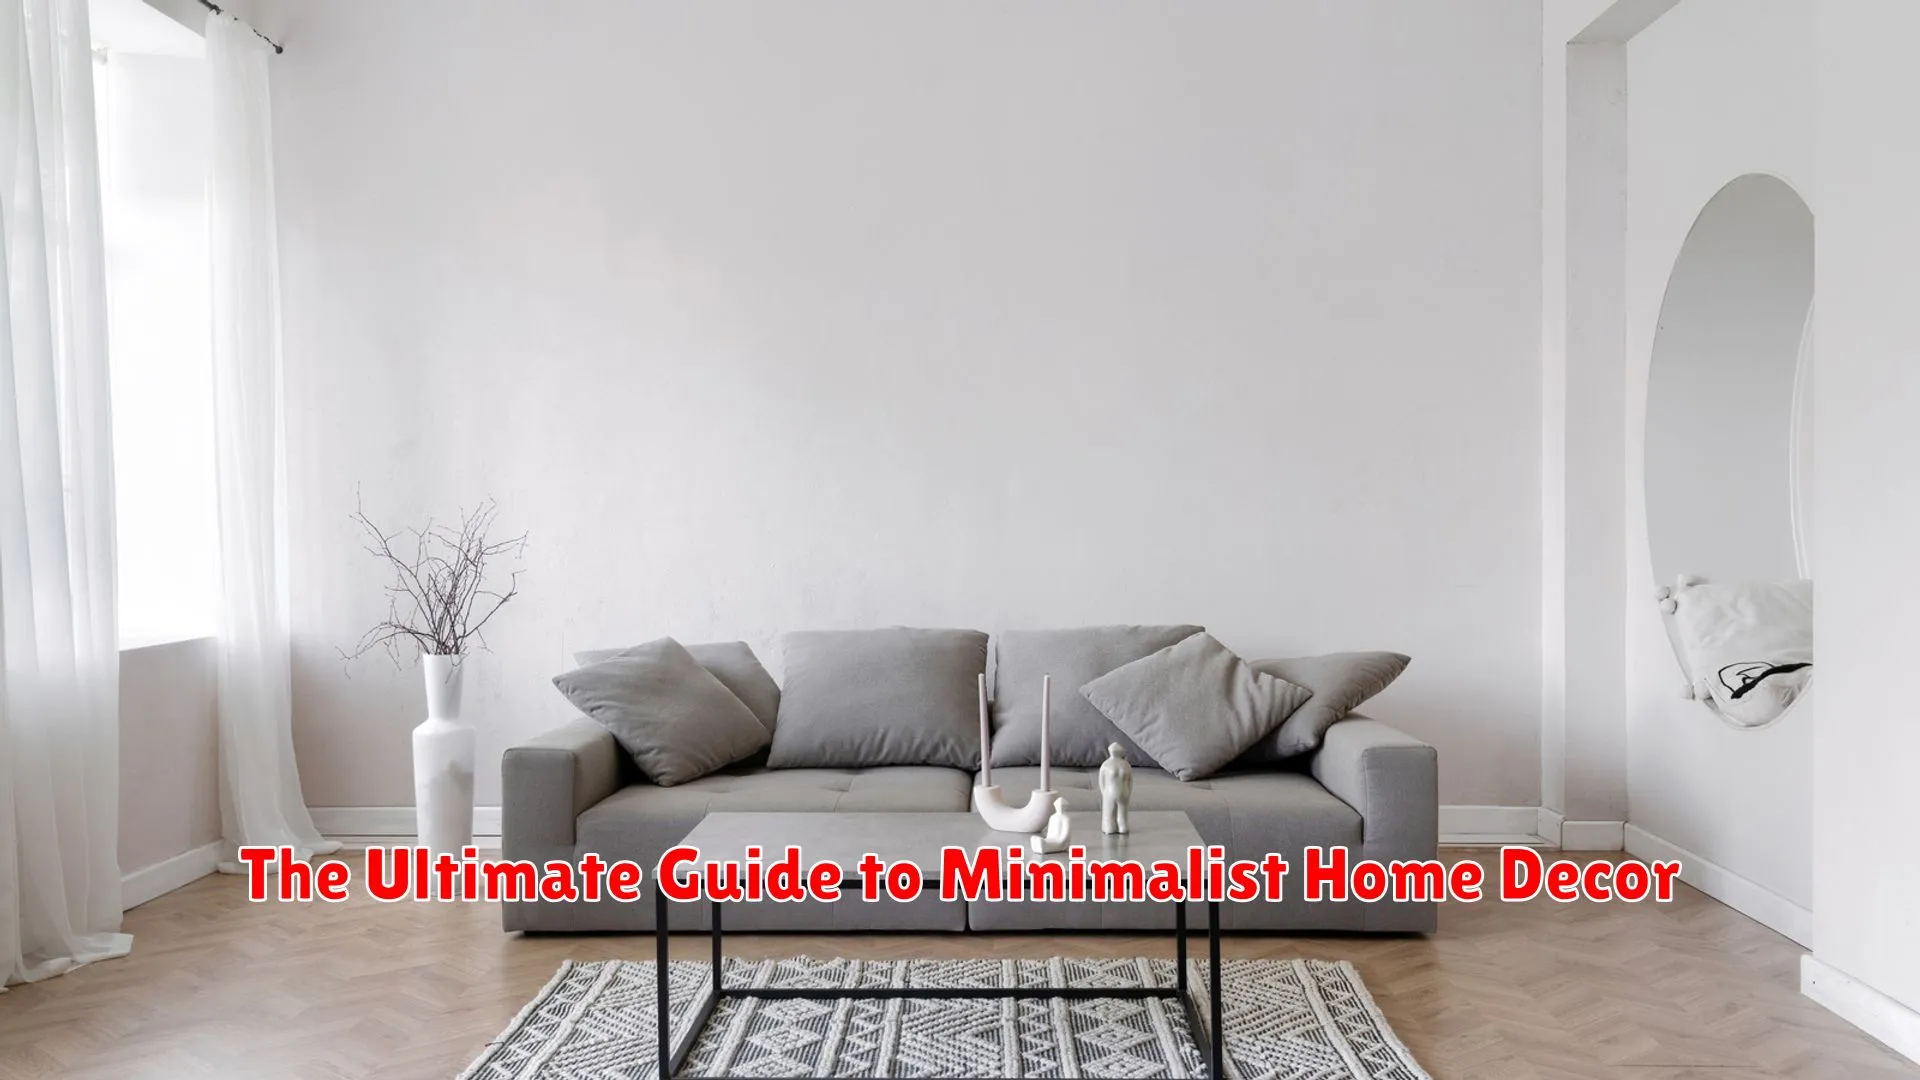 The Ultimate Guide to Minimalist Home Decor